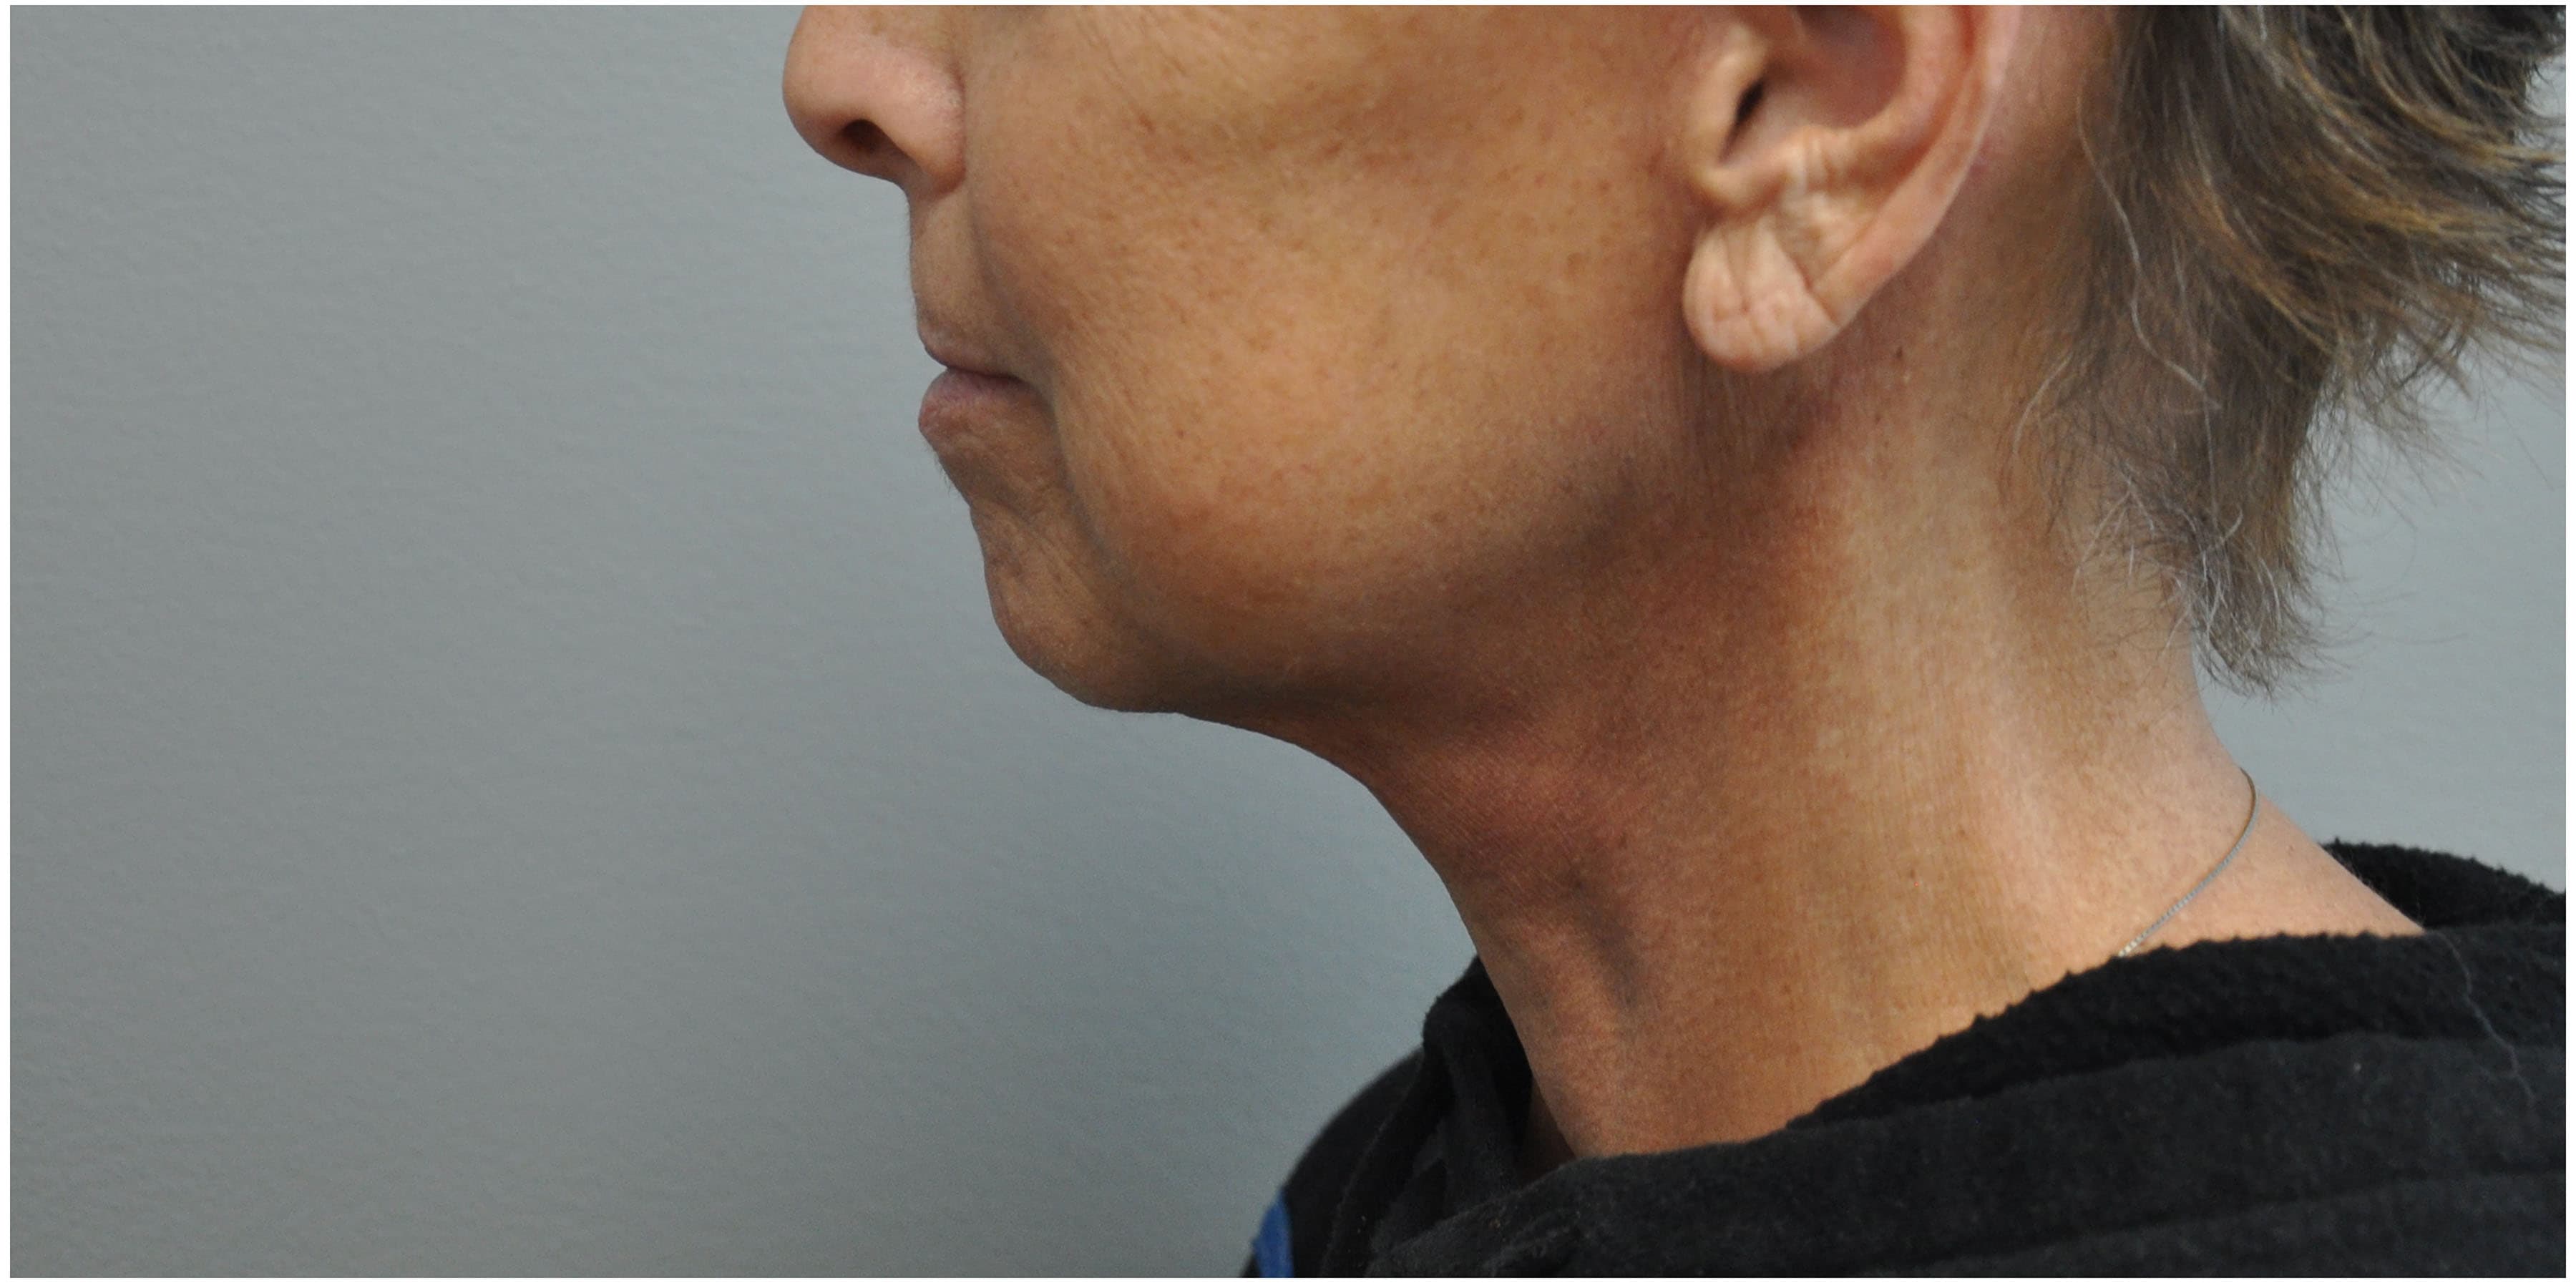 Necklift Before and After | Little Lipo